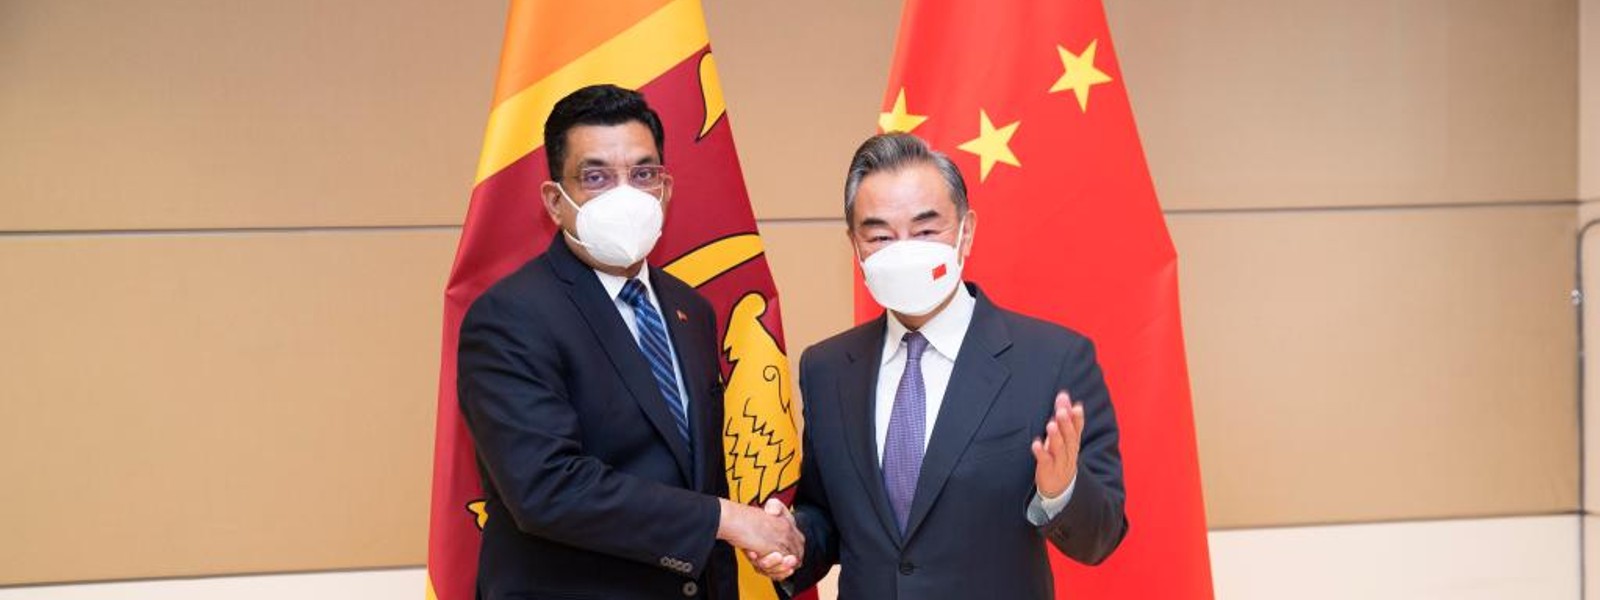 China and Sri Lanka have always shared weal and woe: Chinese Foreign Minister in meeting with Minister Sabry